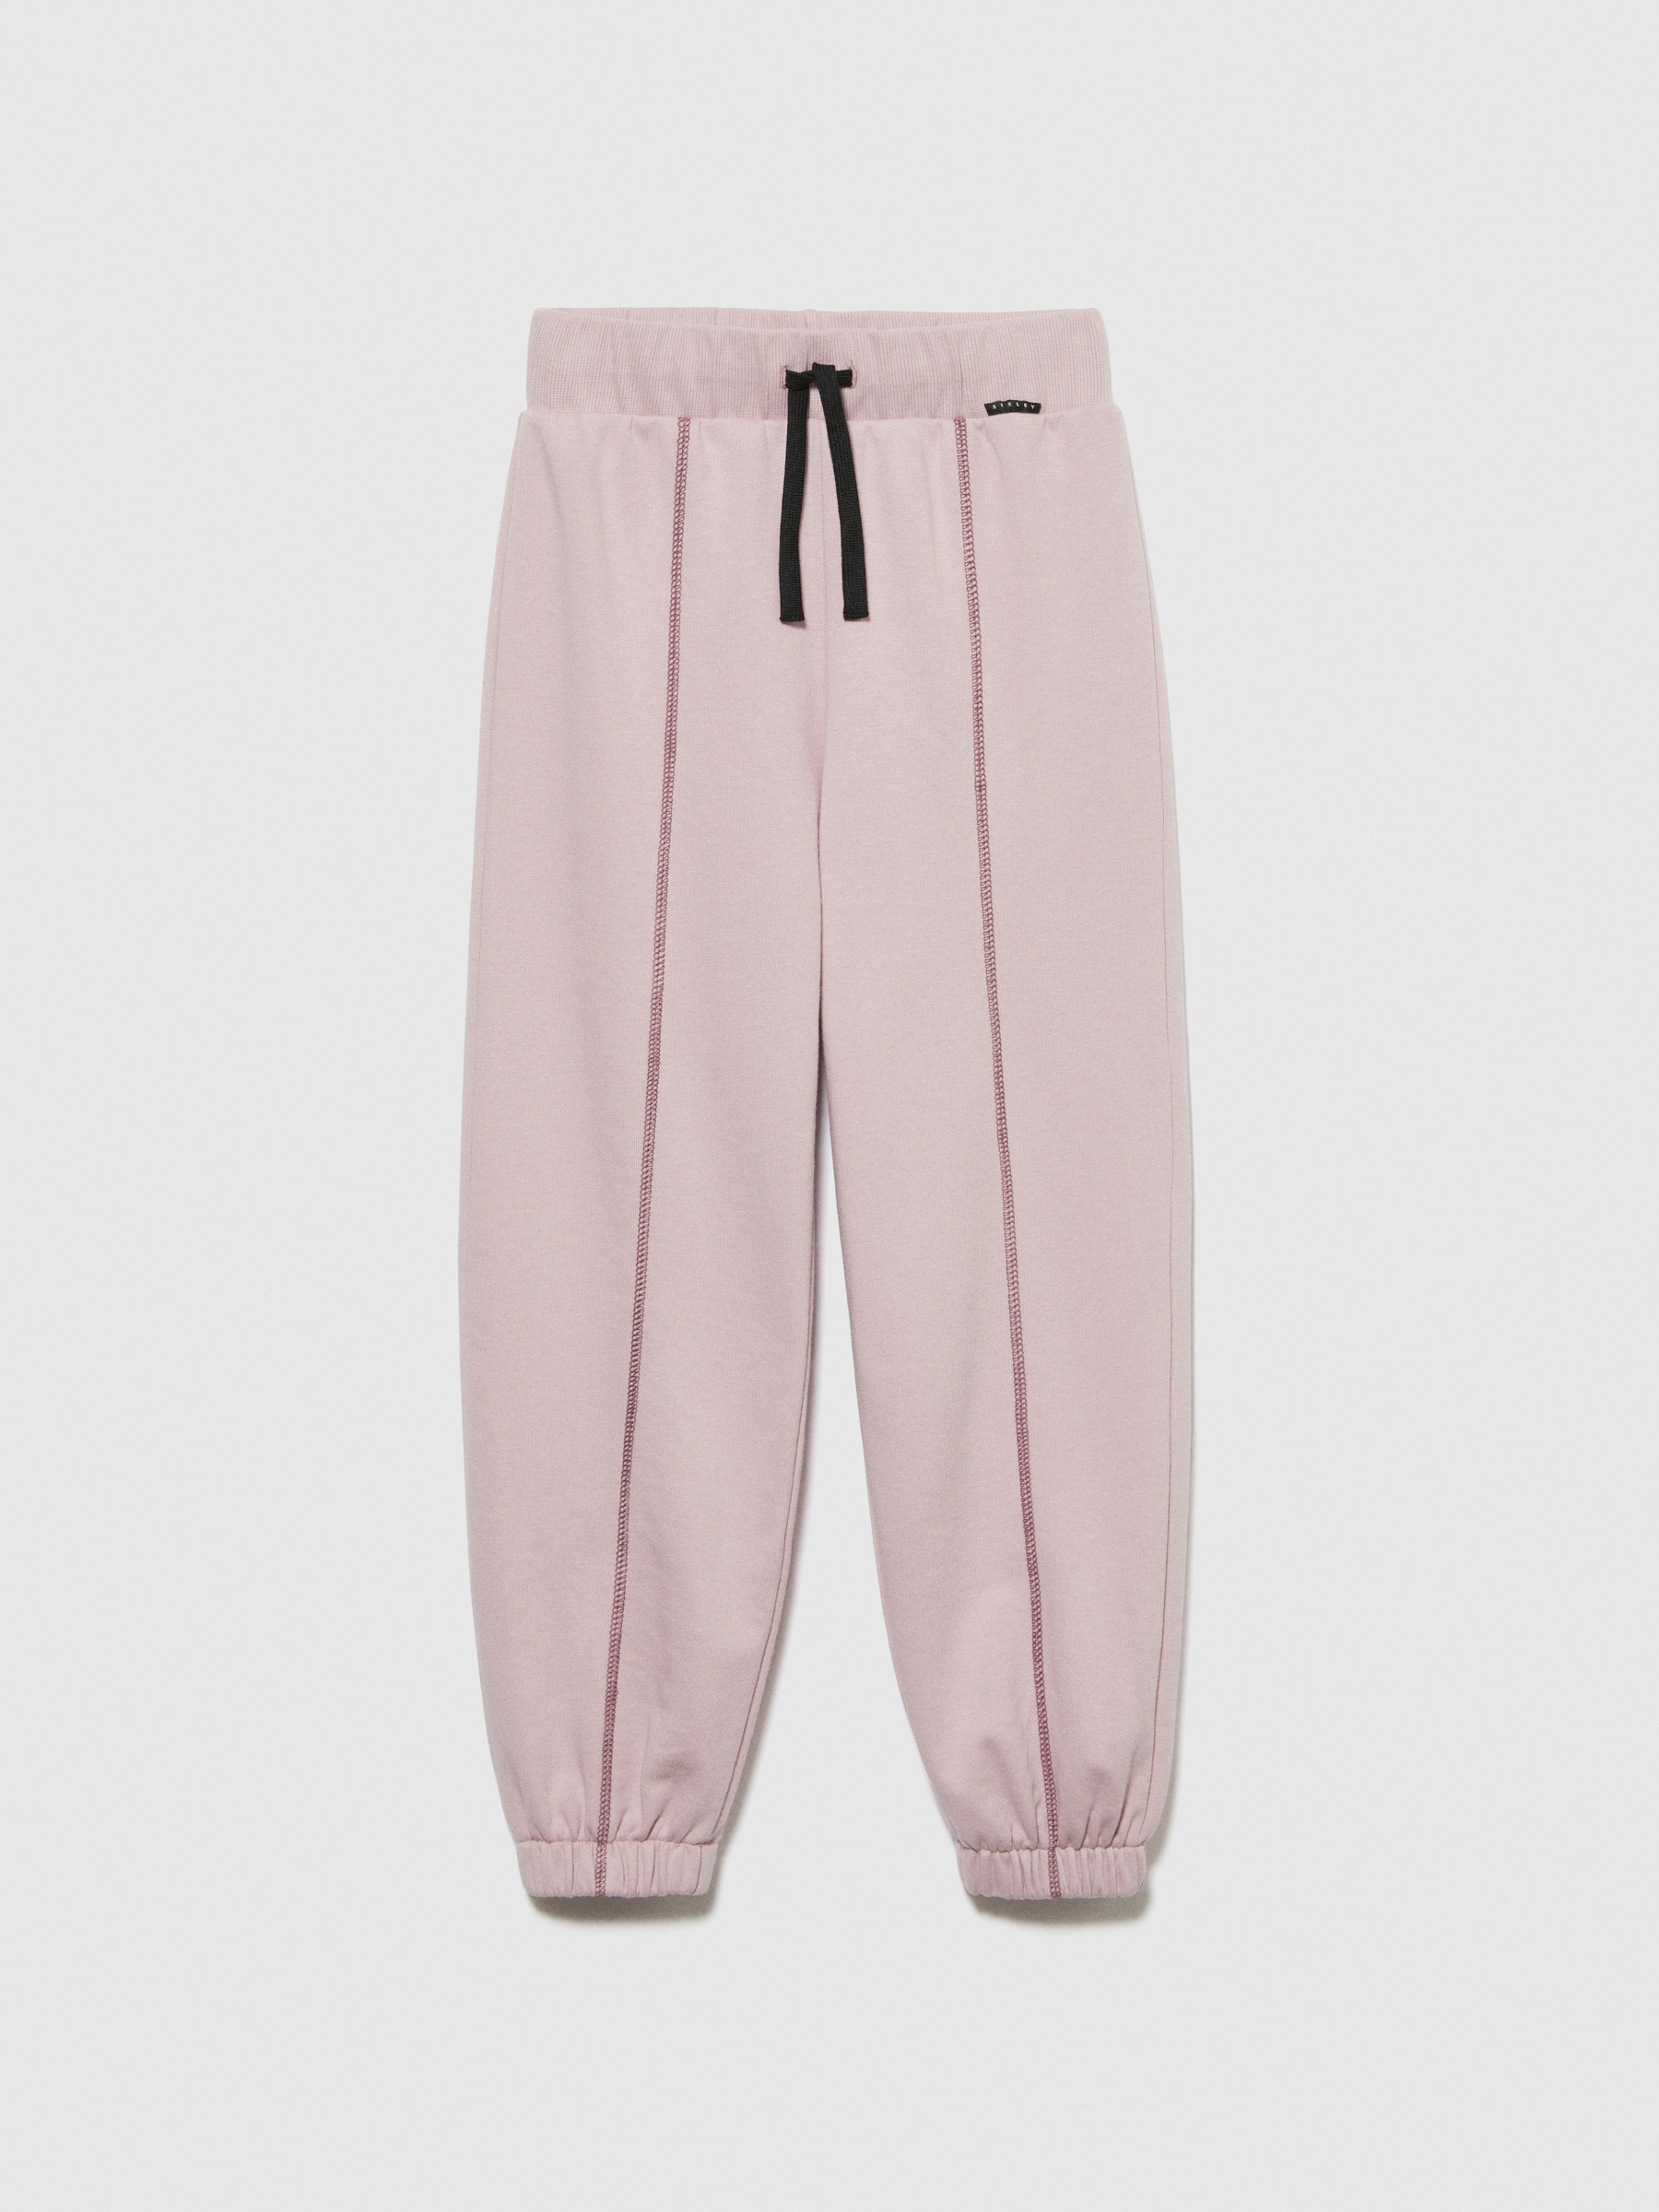 Sisley Young - Oversized Fit Joggers, Woman, Pink, Size: EL